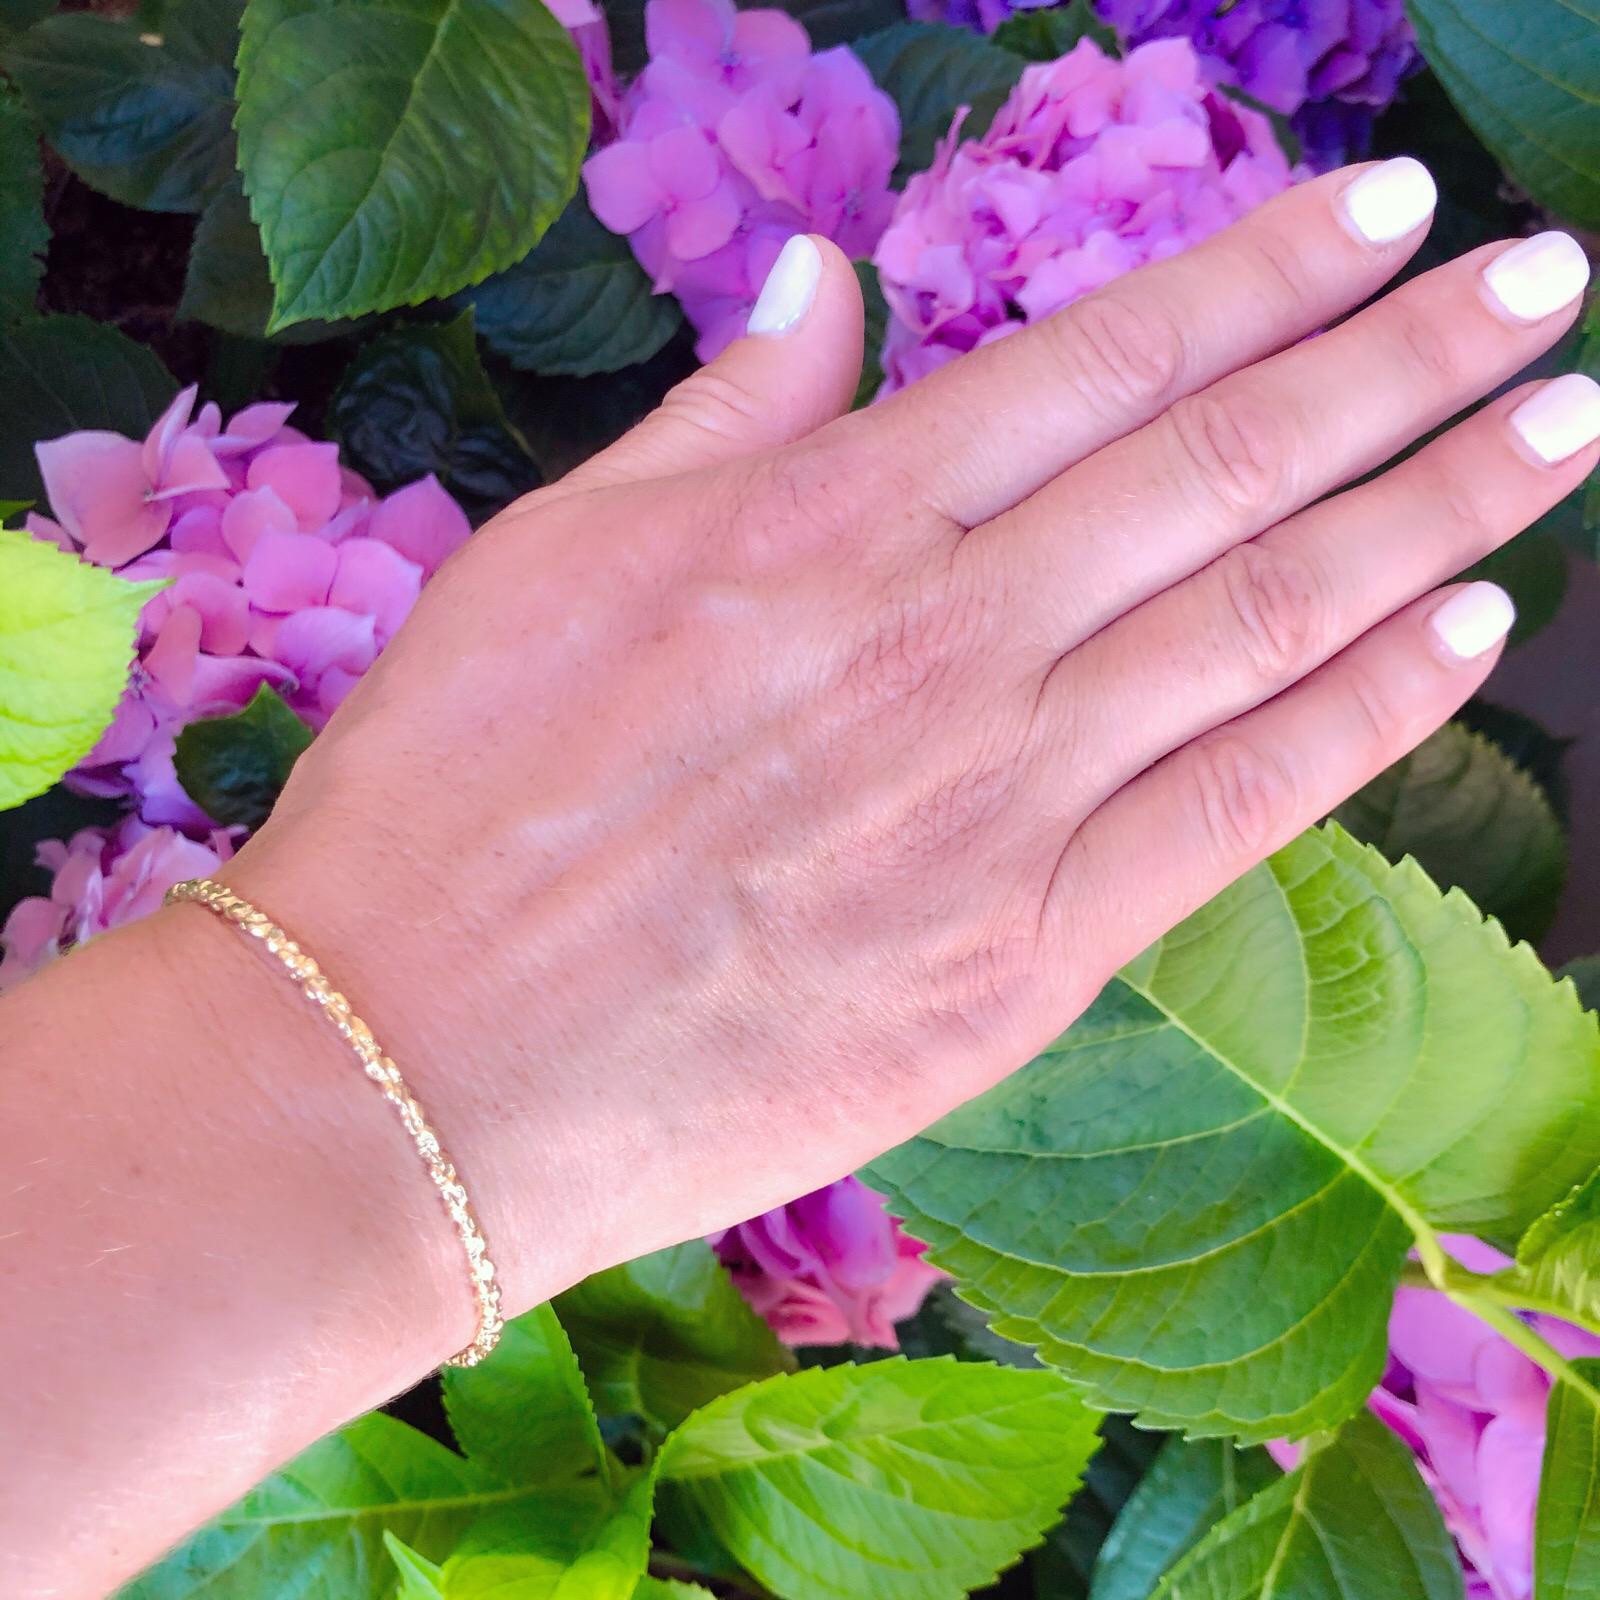 This 18k rose gold bangle bracelet is designed with a hand-cut texture that glimmers. The bracelet fits wrist size of 7.5 inches, and weighs 11.7 grams. Wear alone or stack with other bangles!